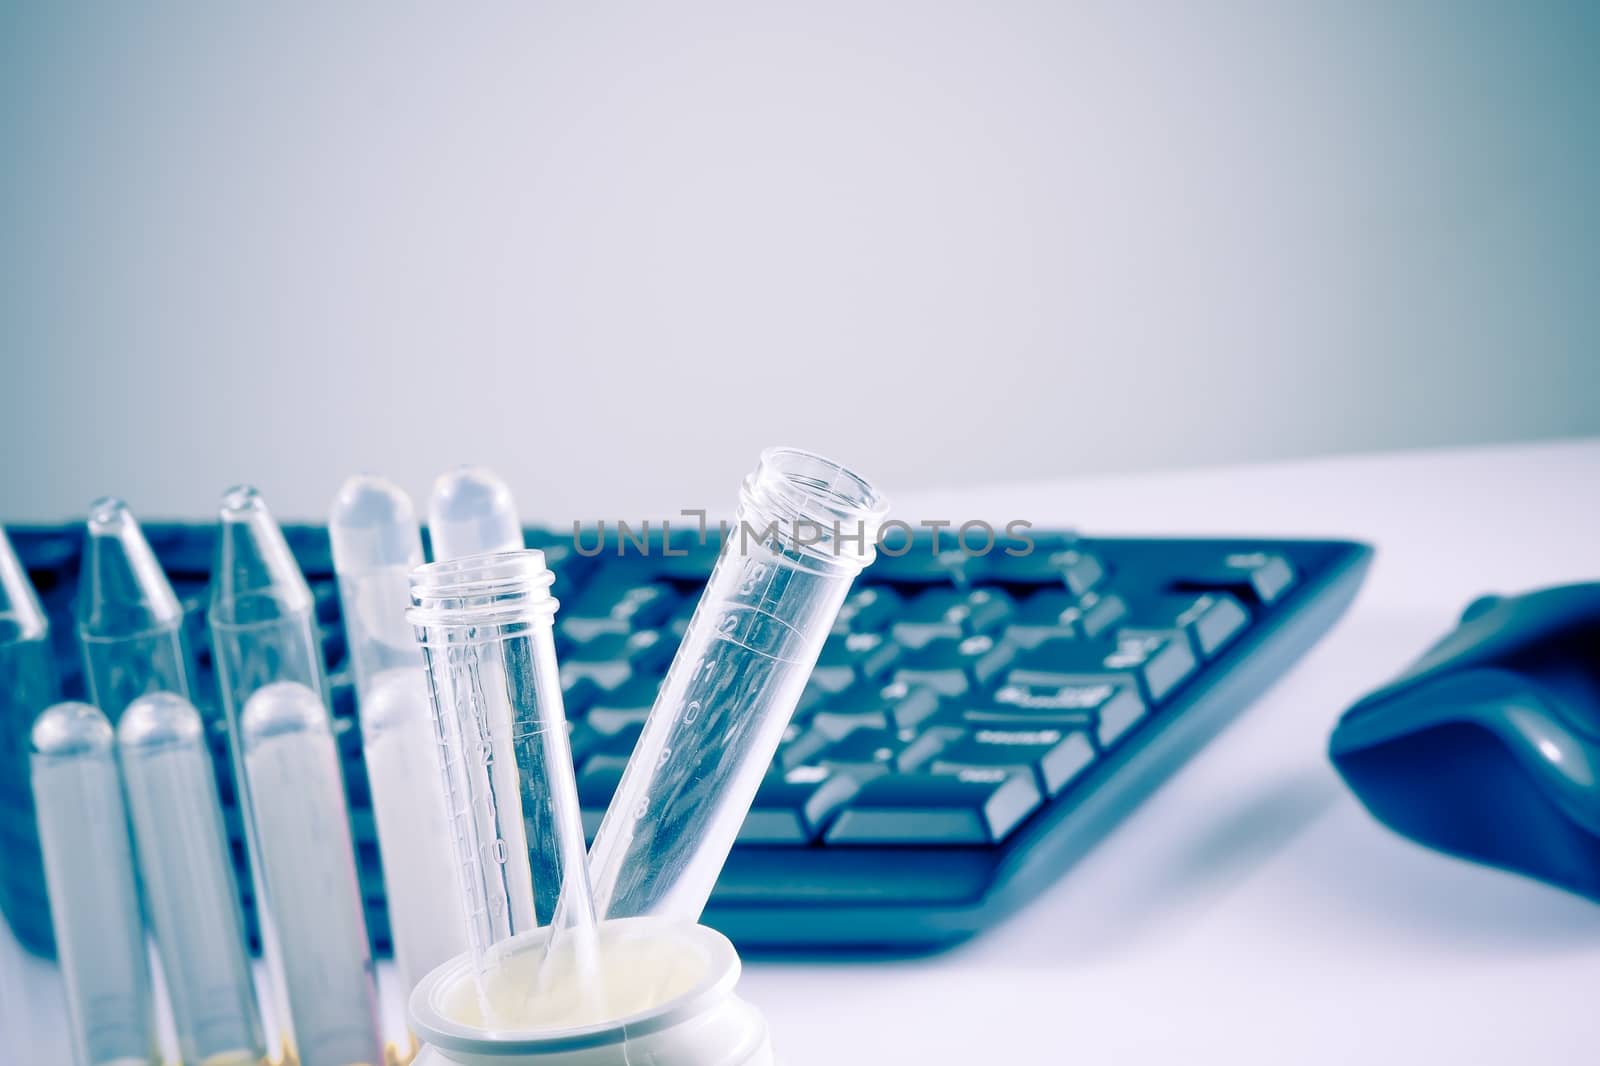 test tubes in laboratory on table near computer keyboard and mouse on table with space for text